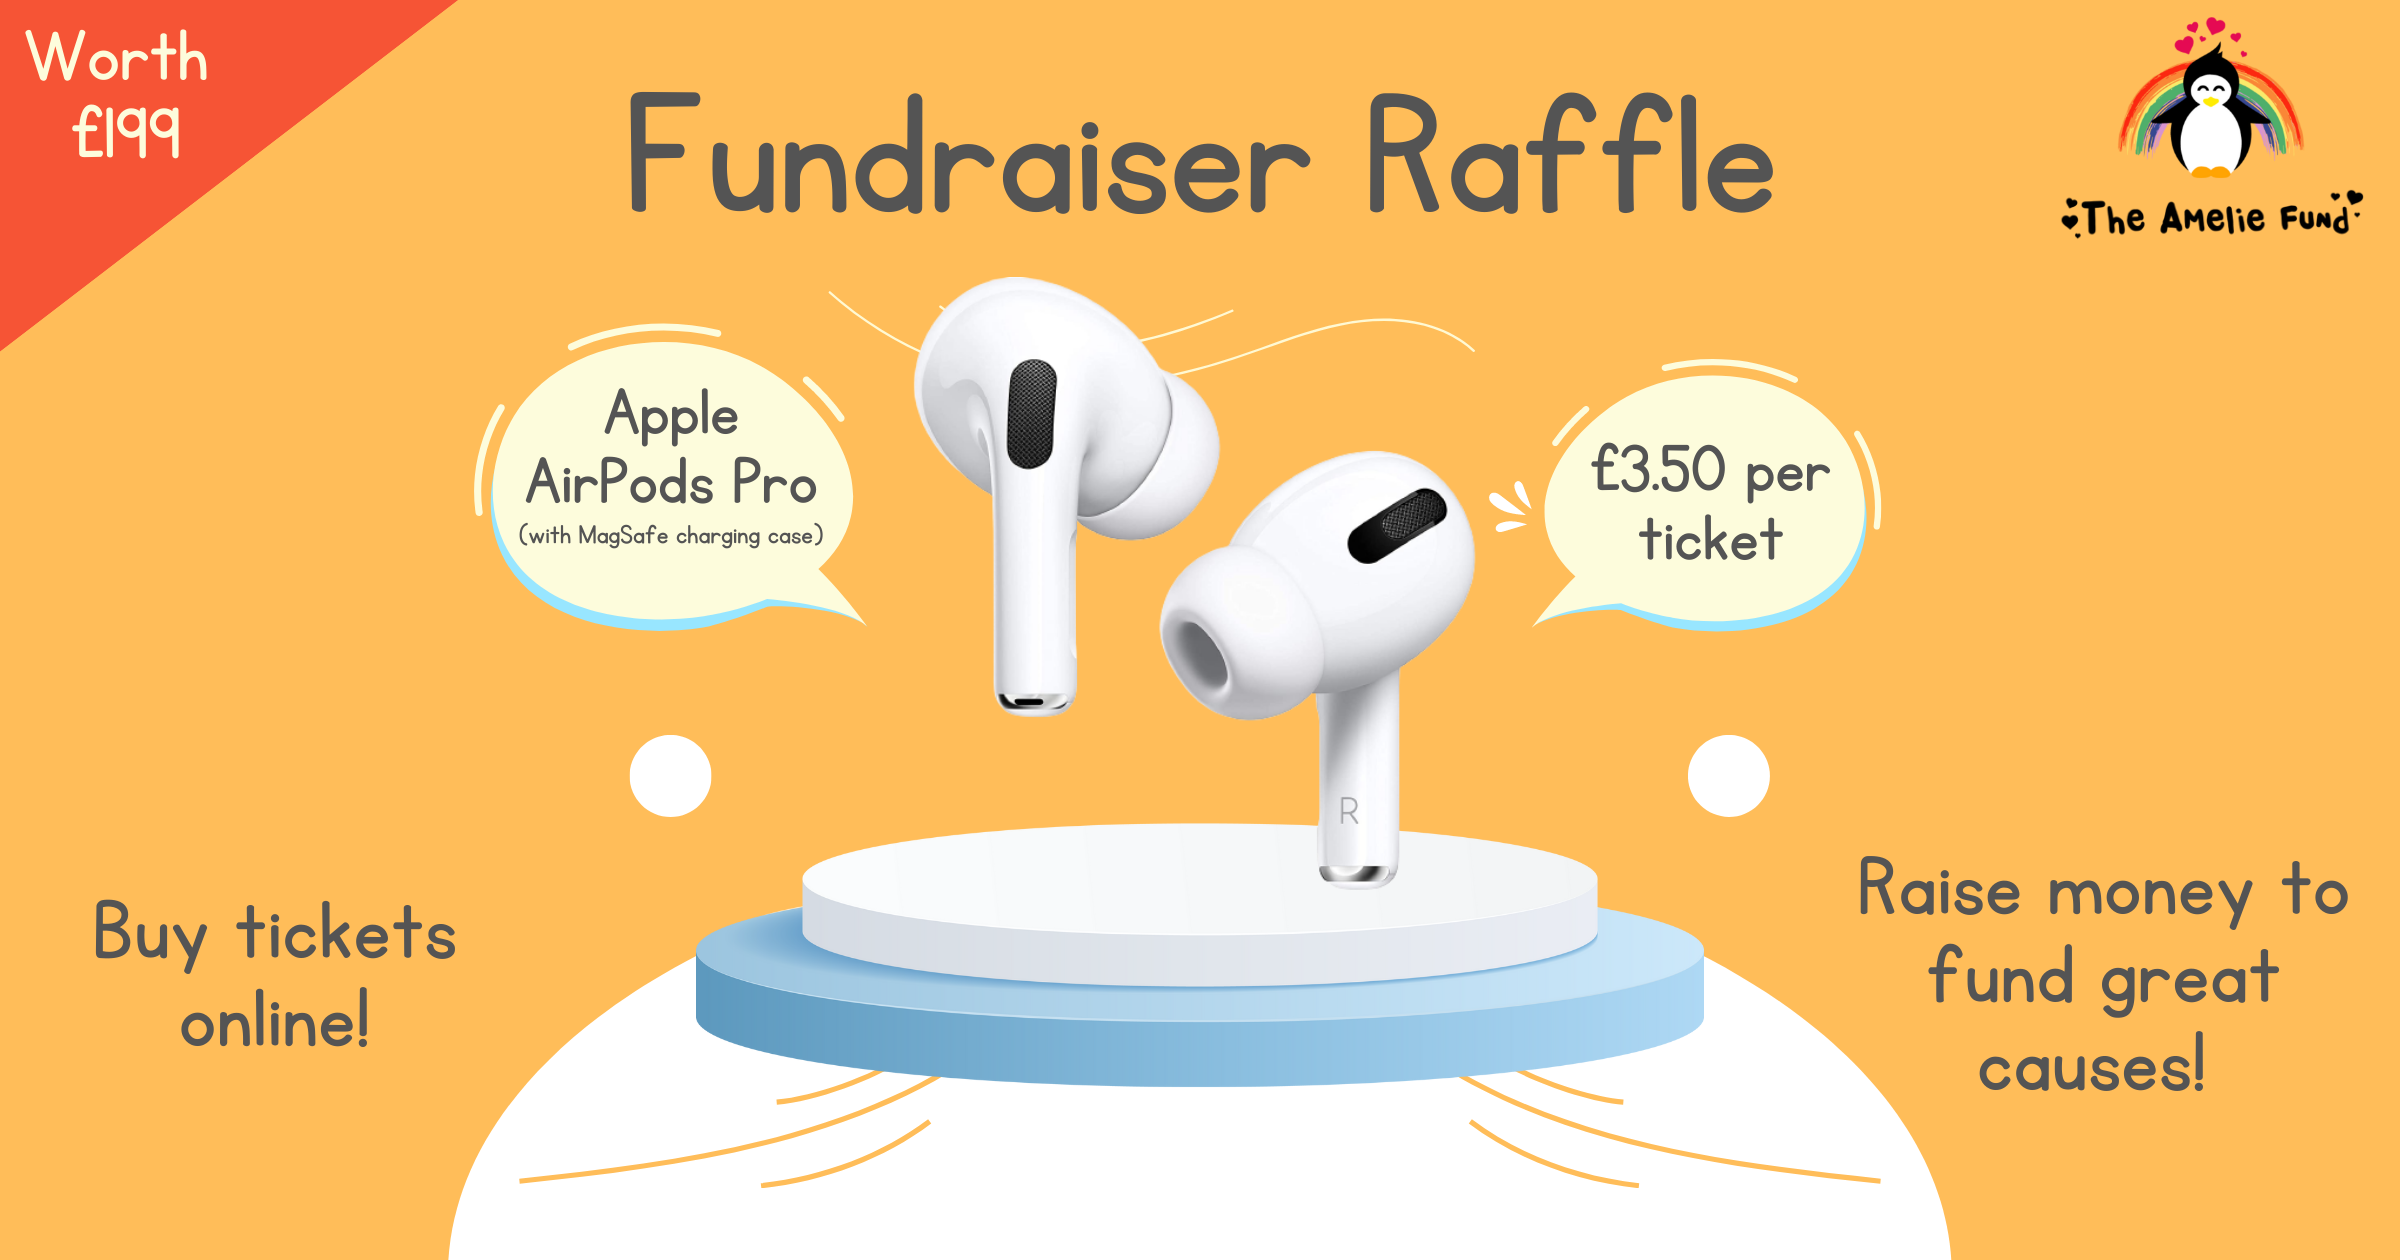 Apple AirPods Pro (with MagSafe charging case) Raffle